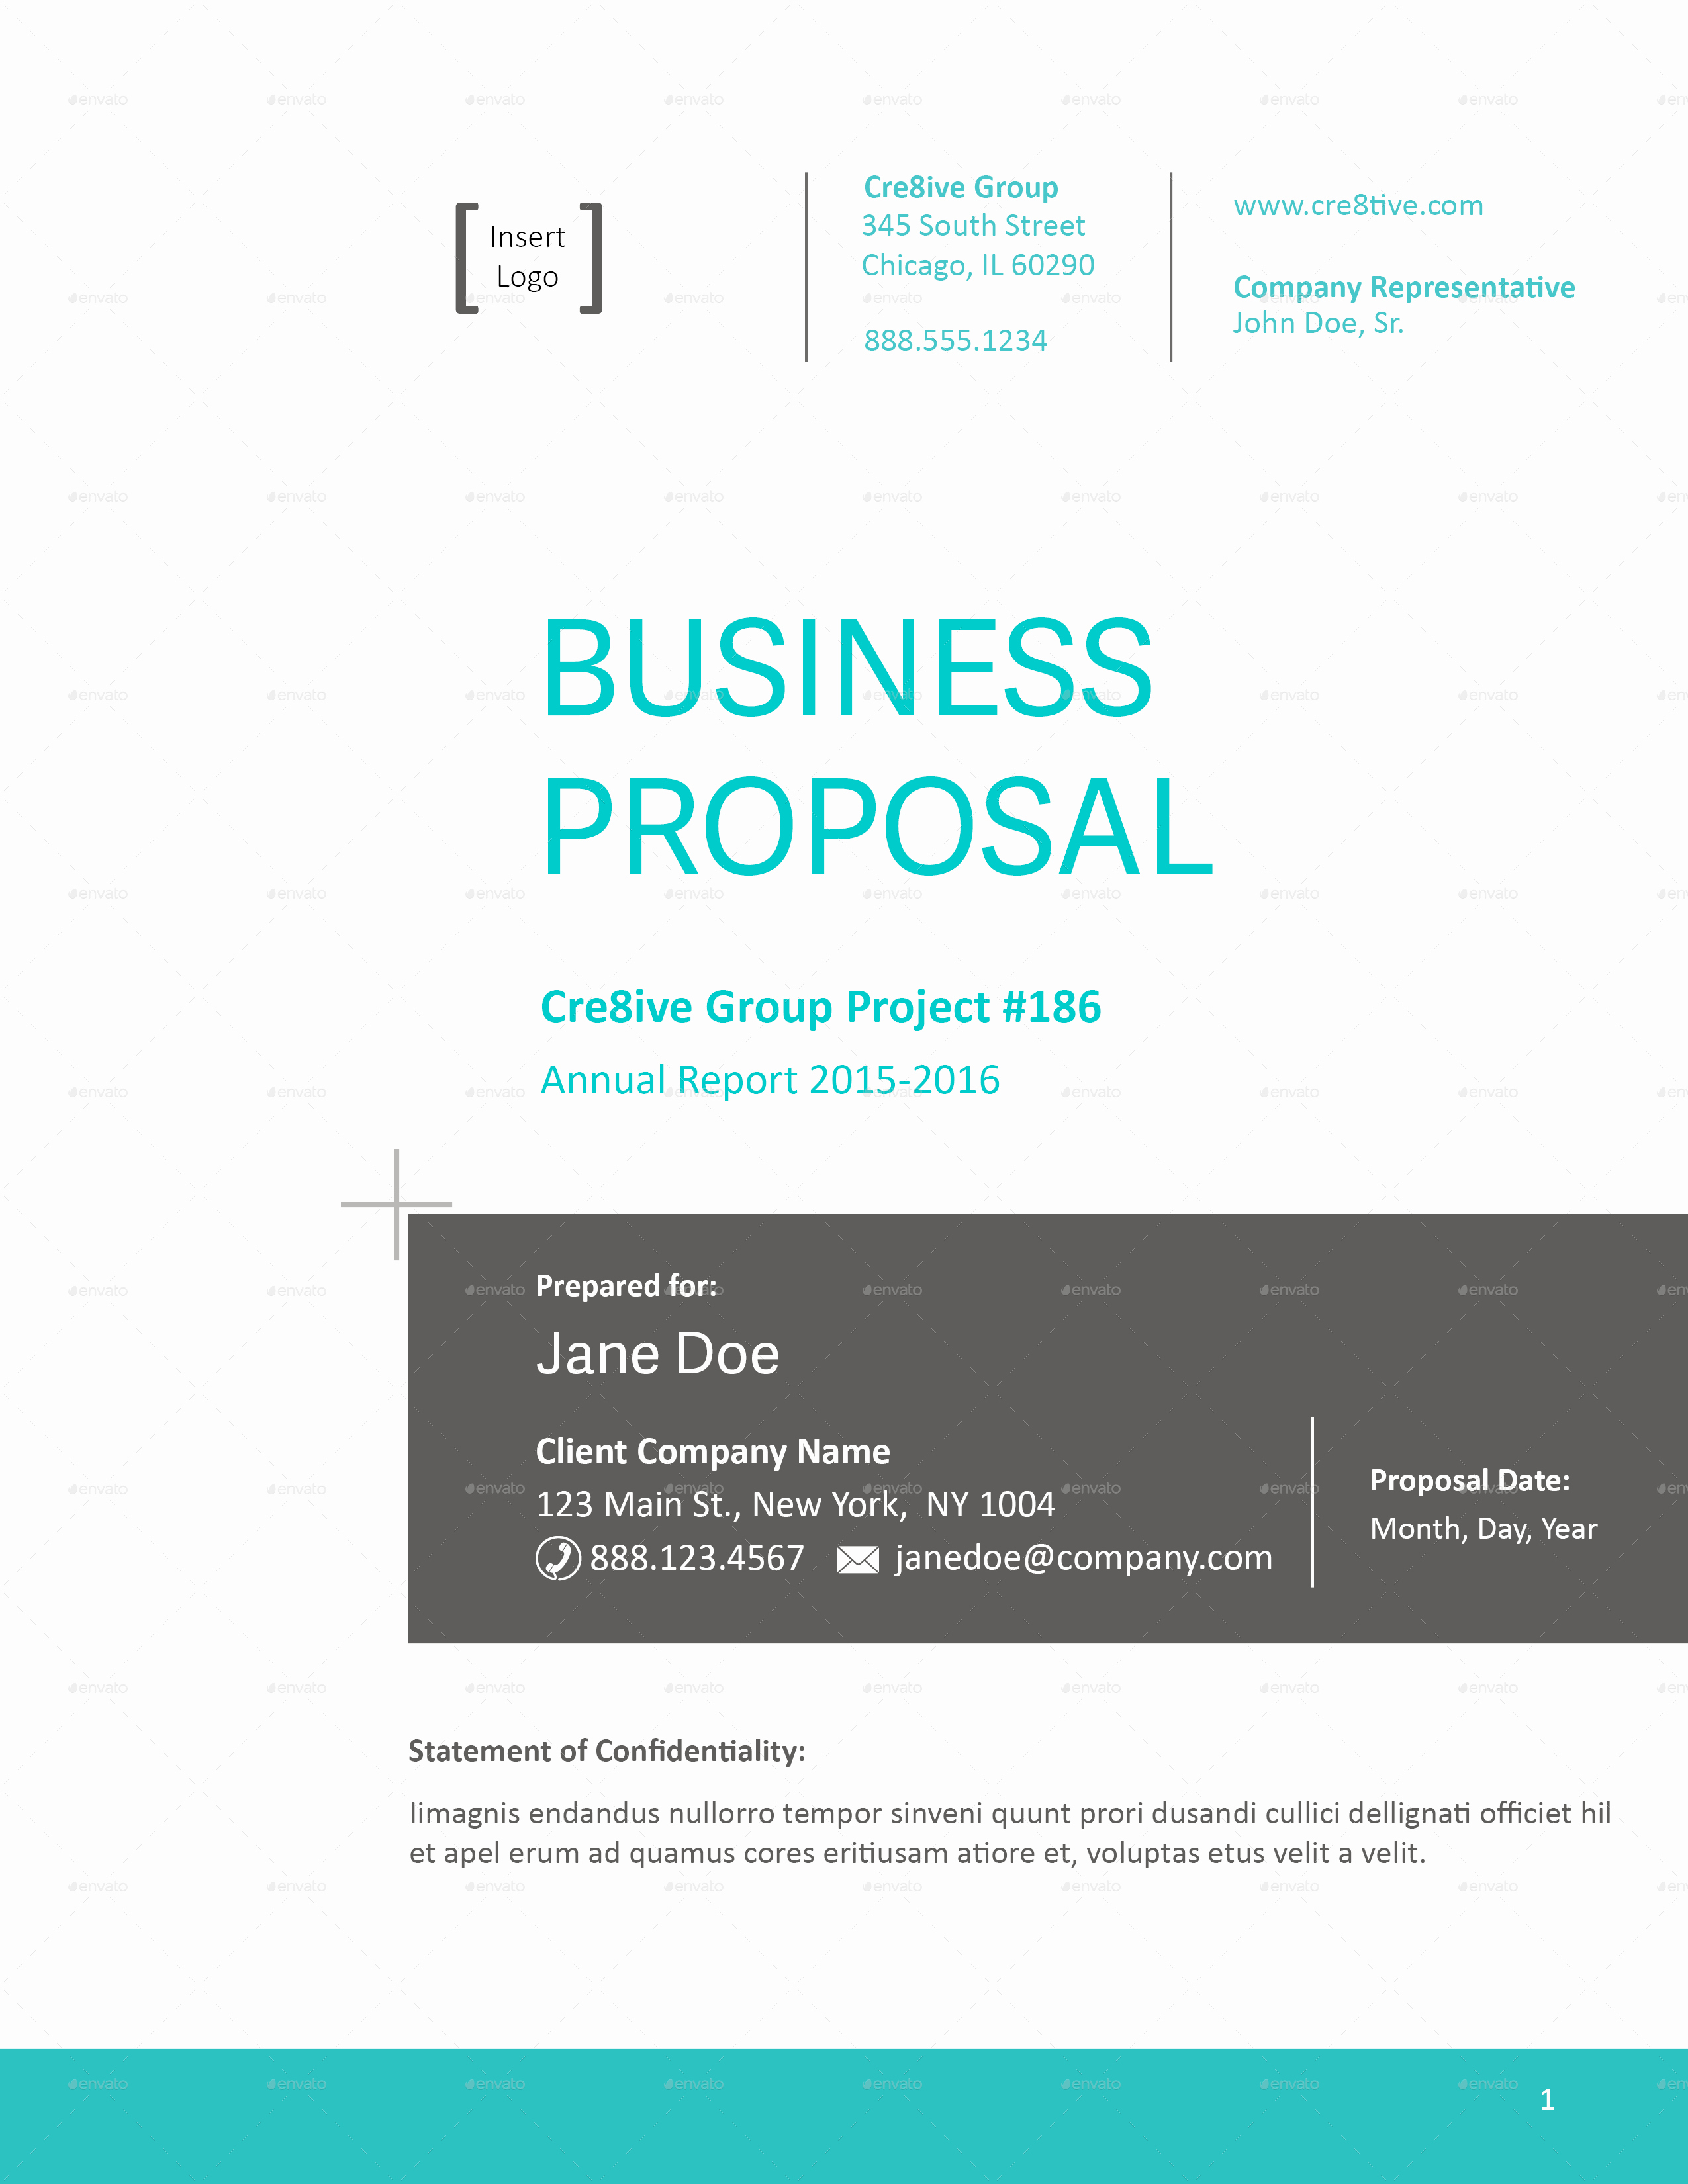 Business Plan Cover Page Template Best Of Business Proposal Cover